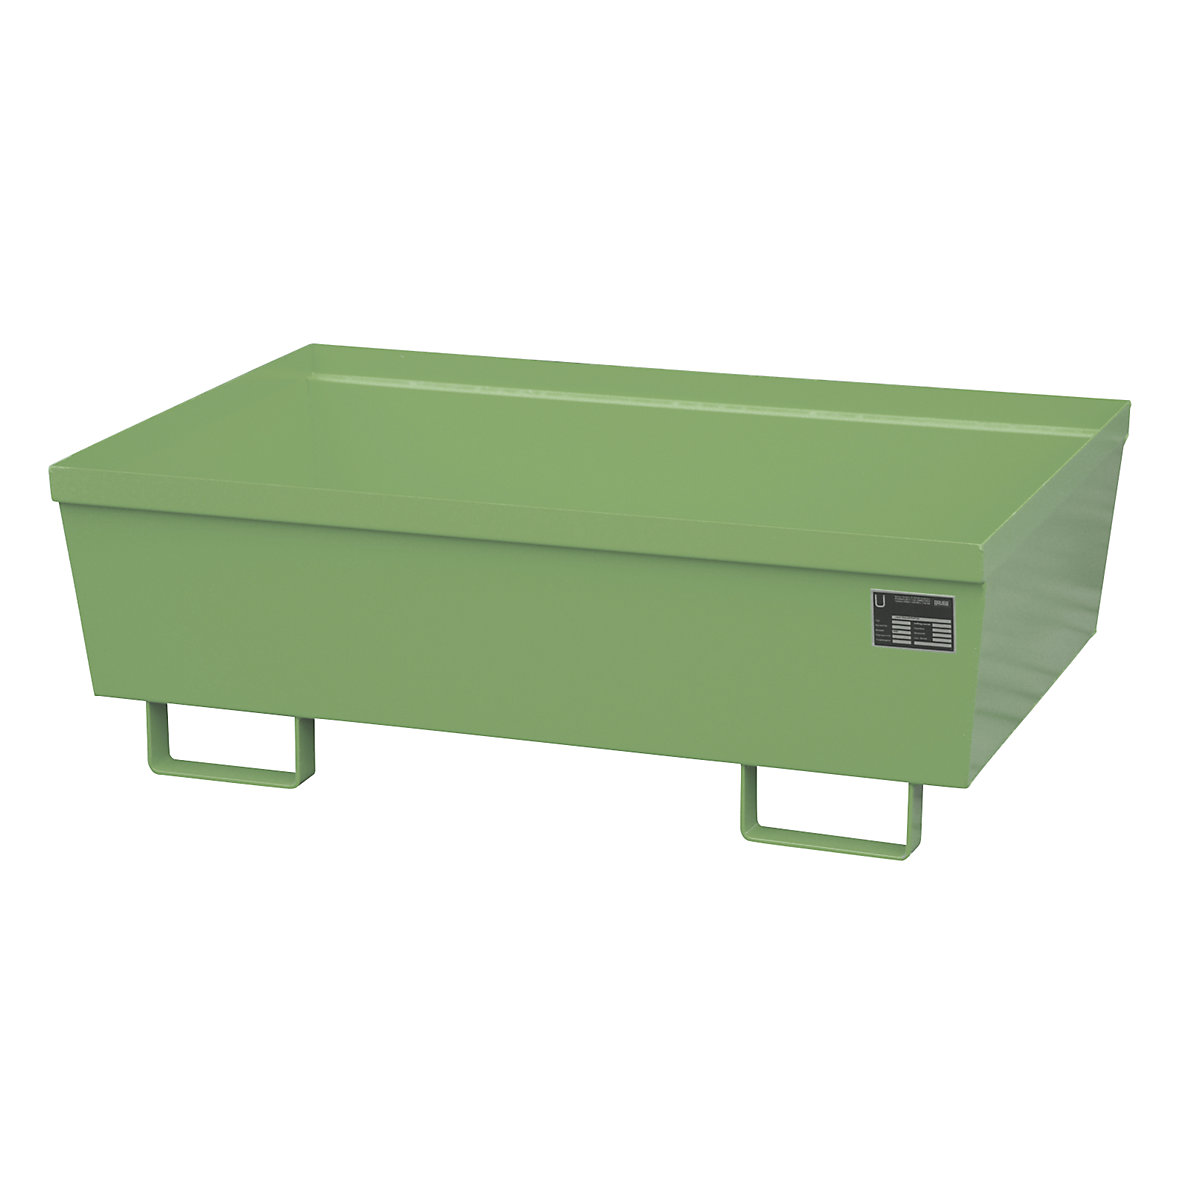 Steel sump tray with edge profiles – eurokraft pro, LxWxH 1200 x 800 x 415 mm, without grate, green RAL 6011-9